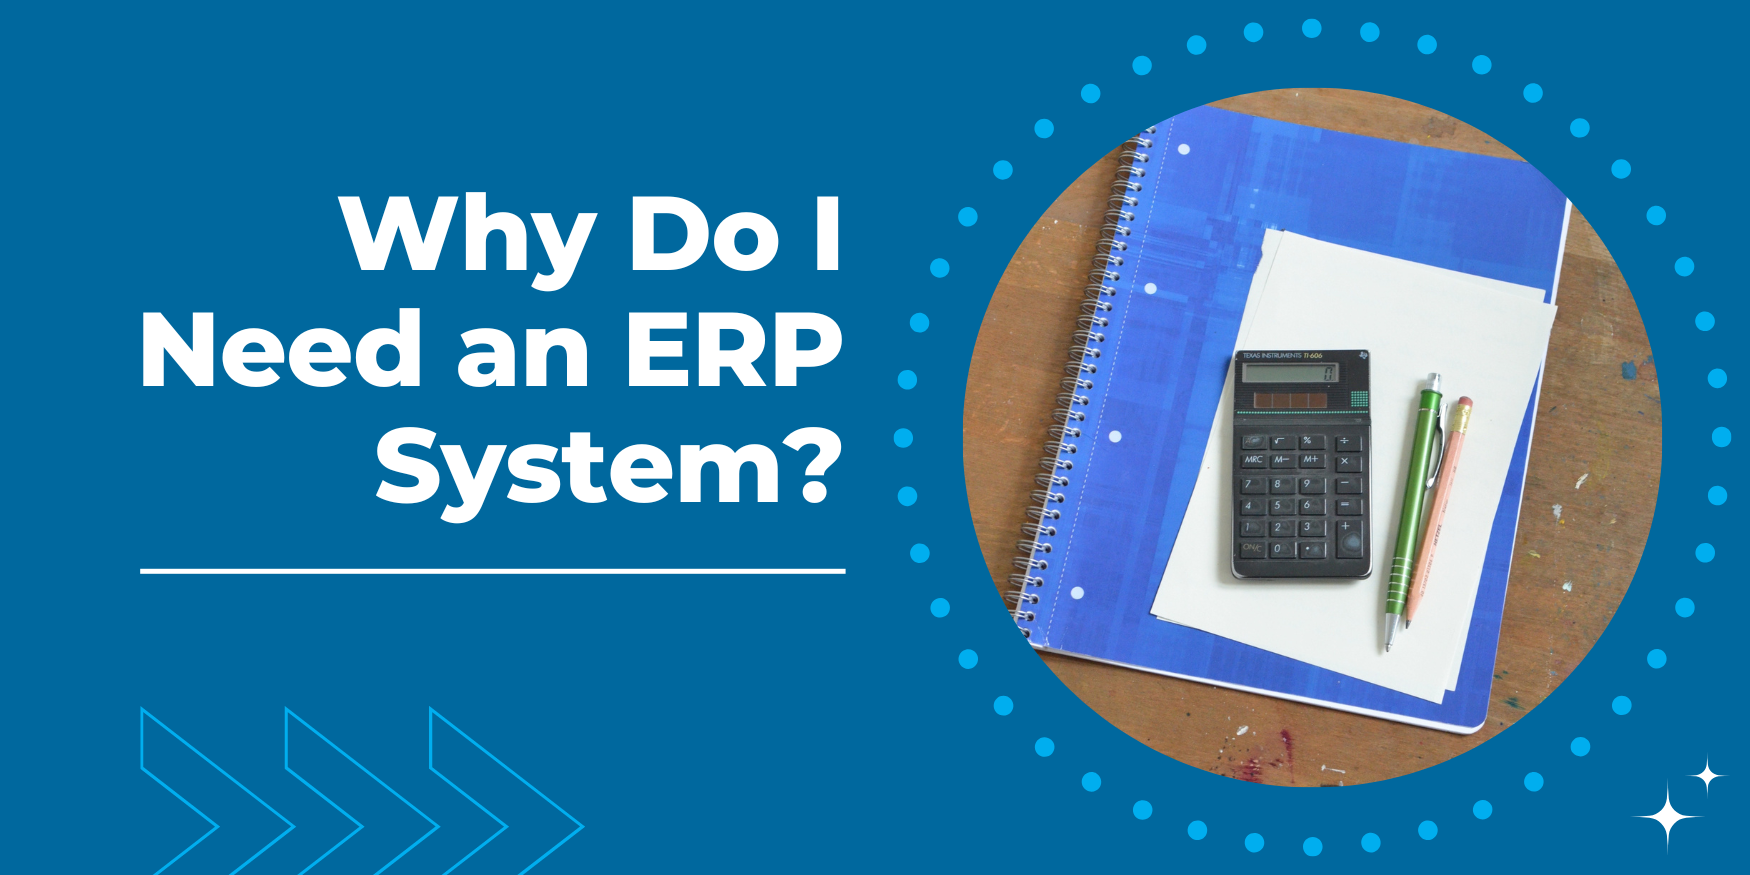 Why Do I Need an ERP System?